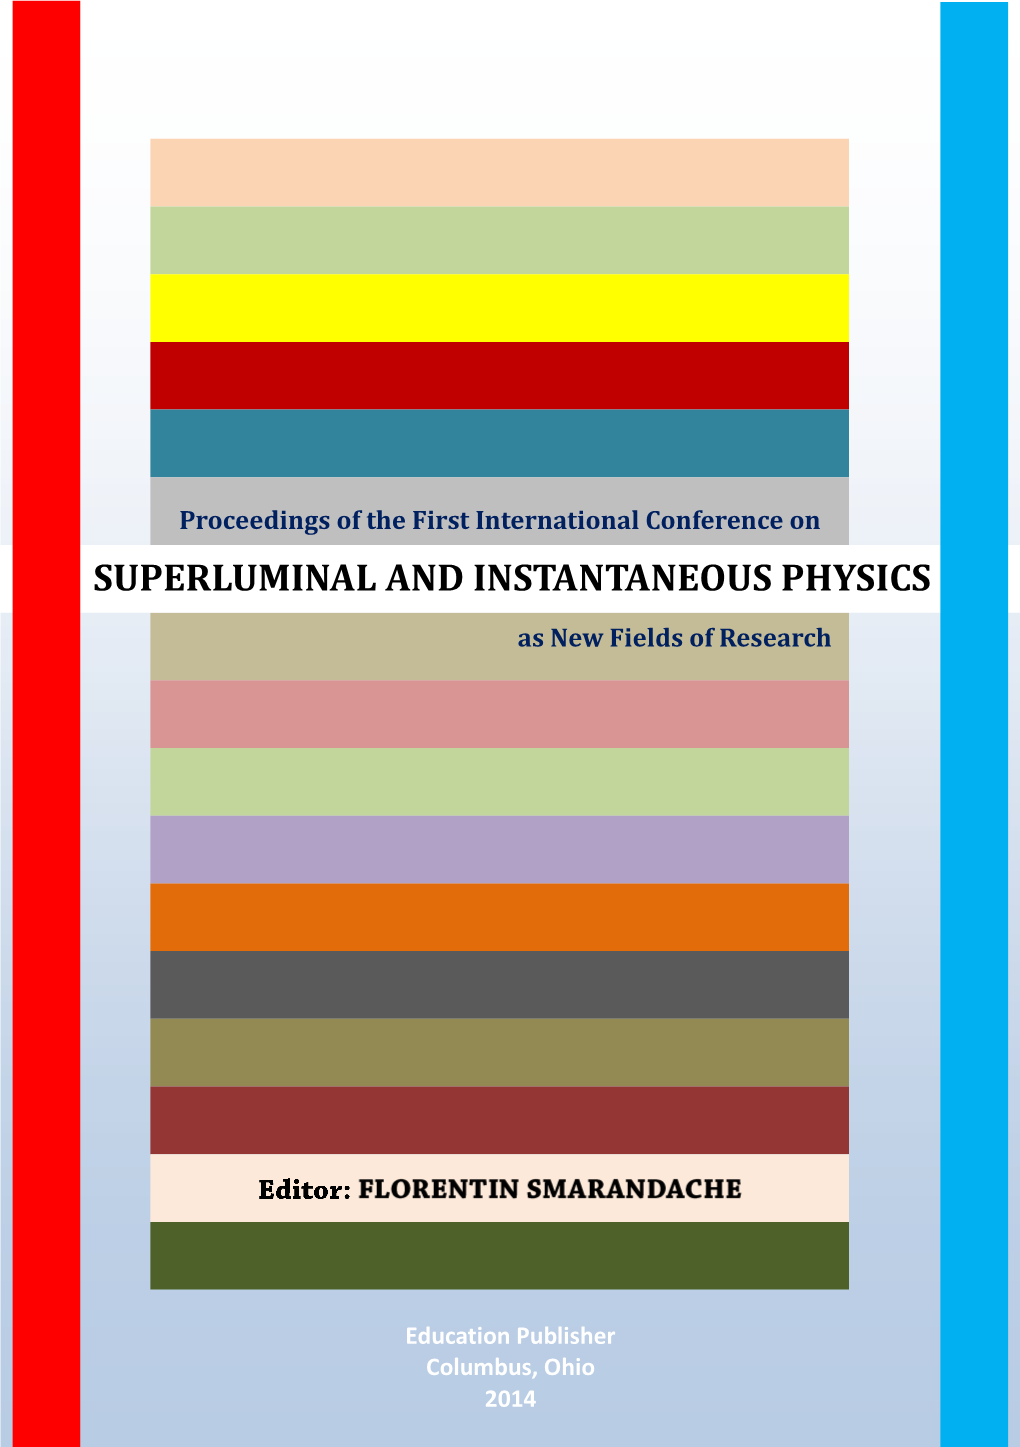 Proceedings of the First International Conference on Superluminal Physics & Instantaneous Physics As New Fields of Research